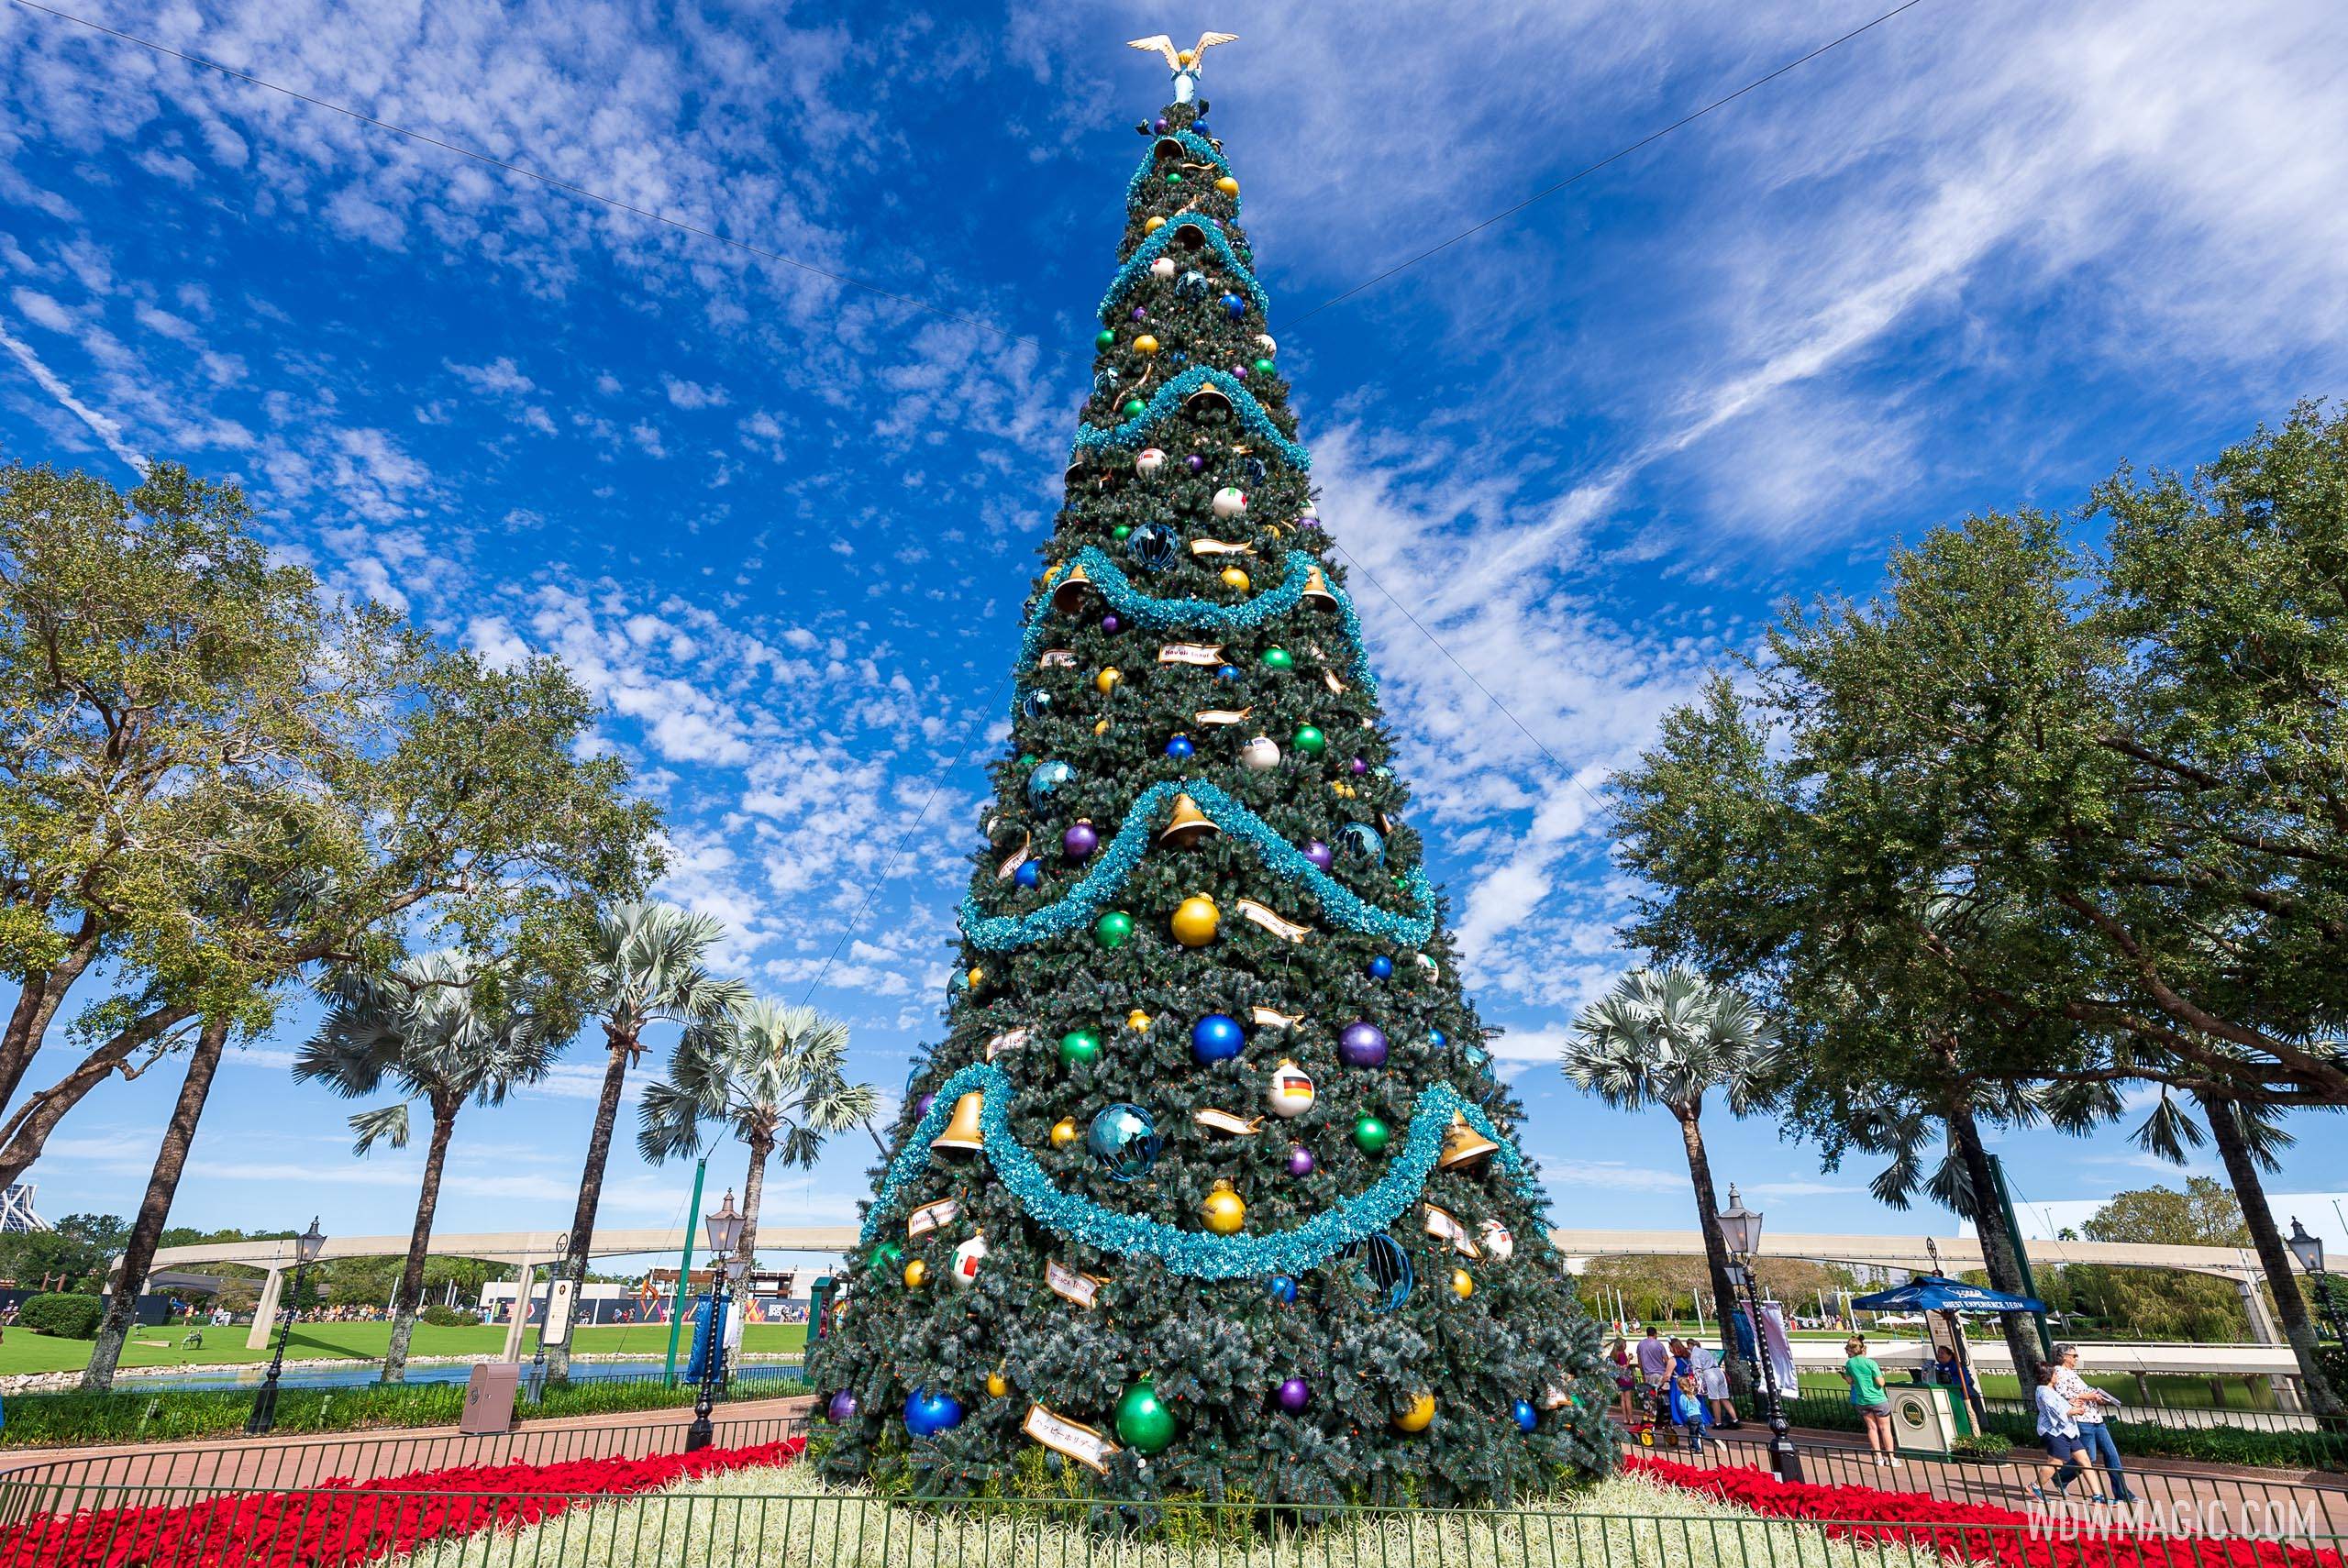 Walt Disney World continues to be a hugely popular destination for the holidays